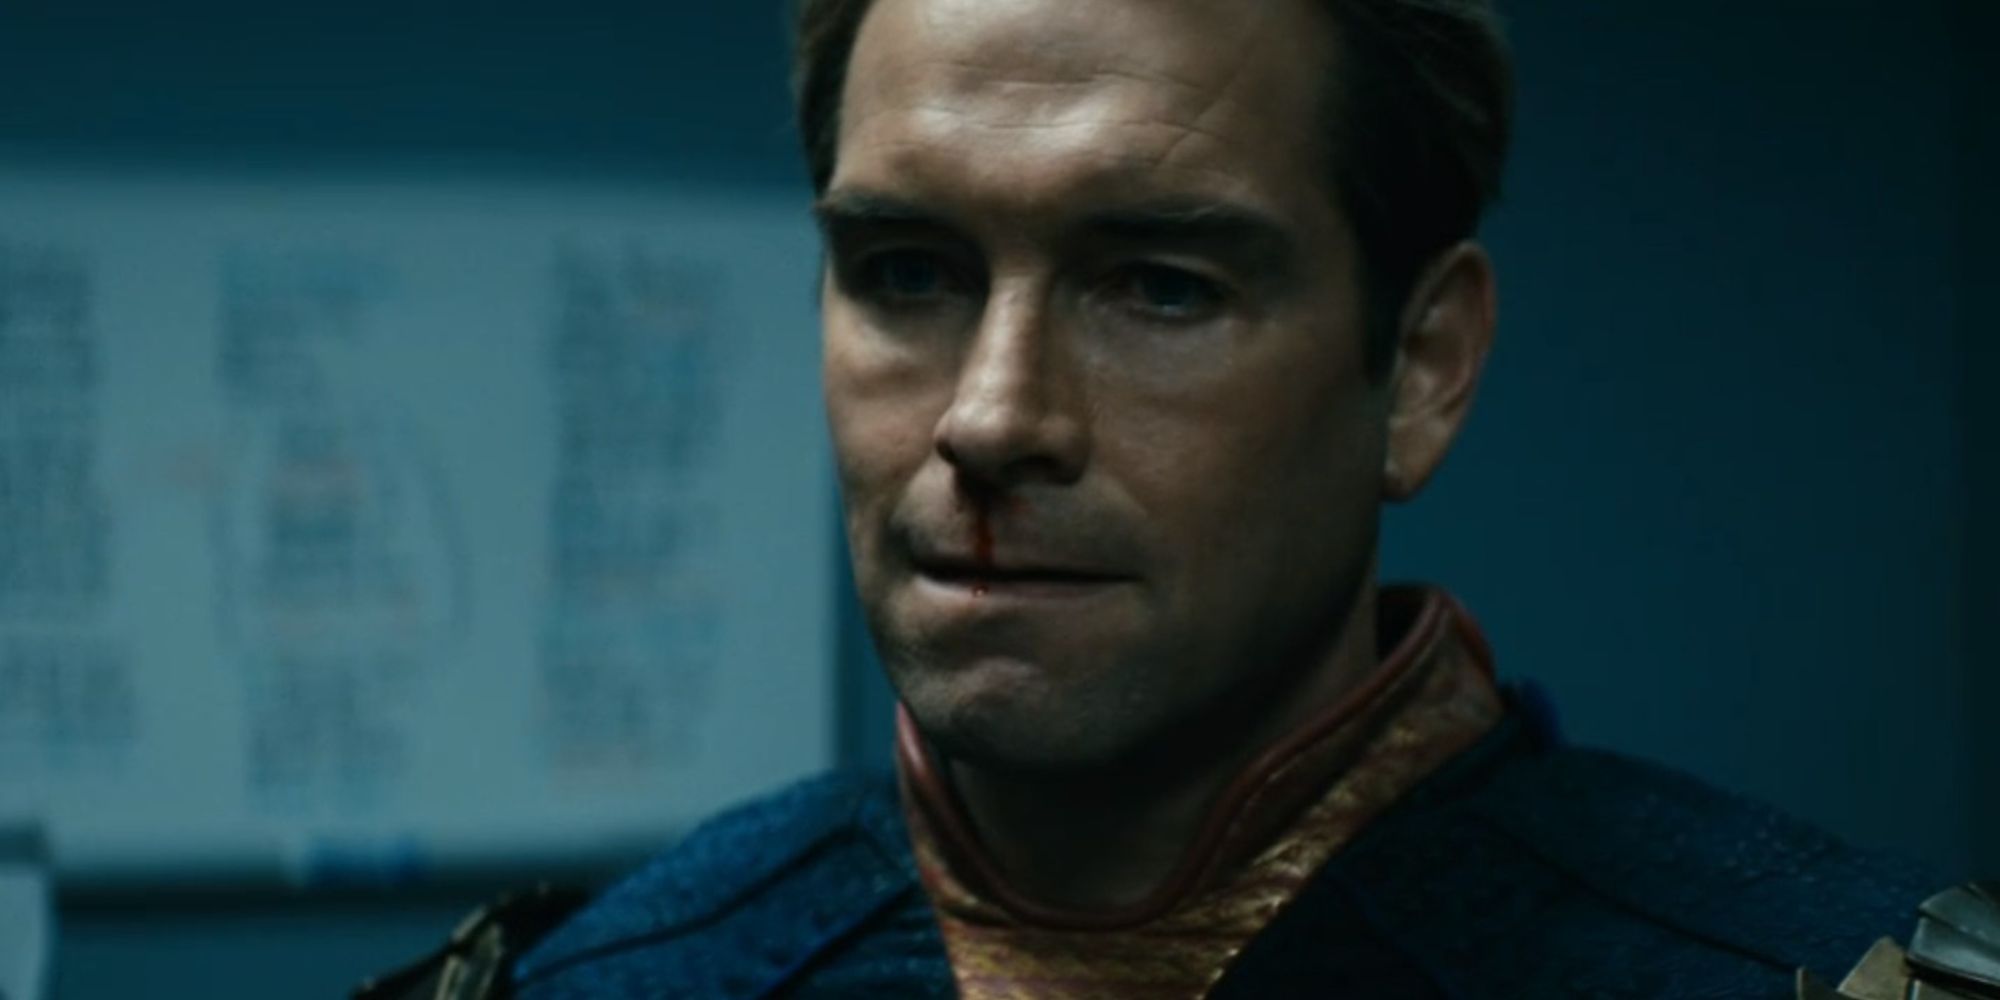 Antony Starr in The Boys as Homelander with a slightly bloody nose